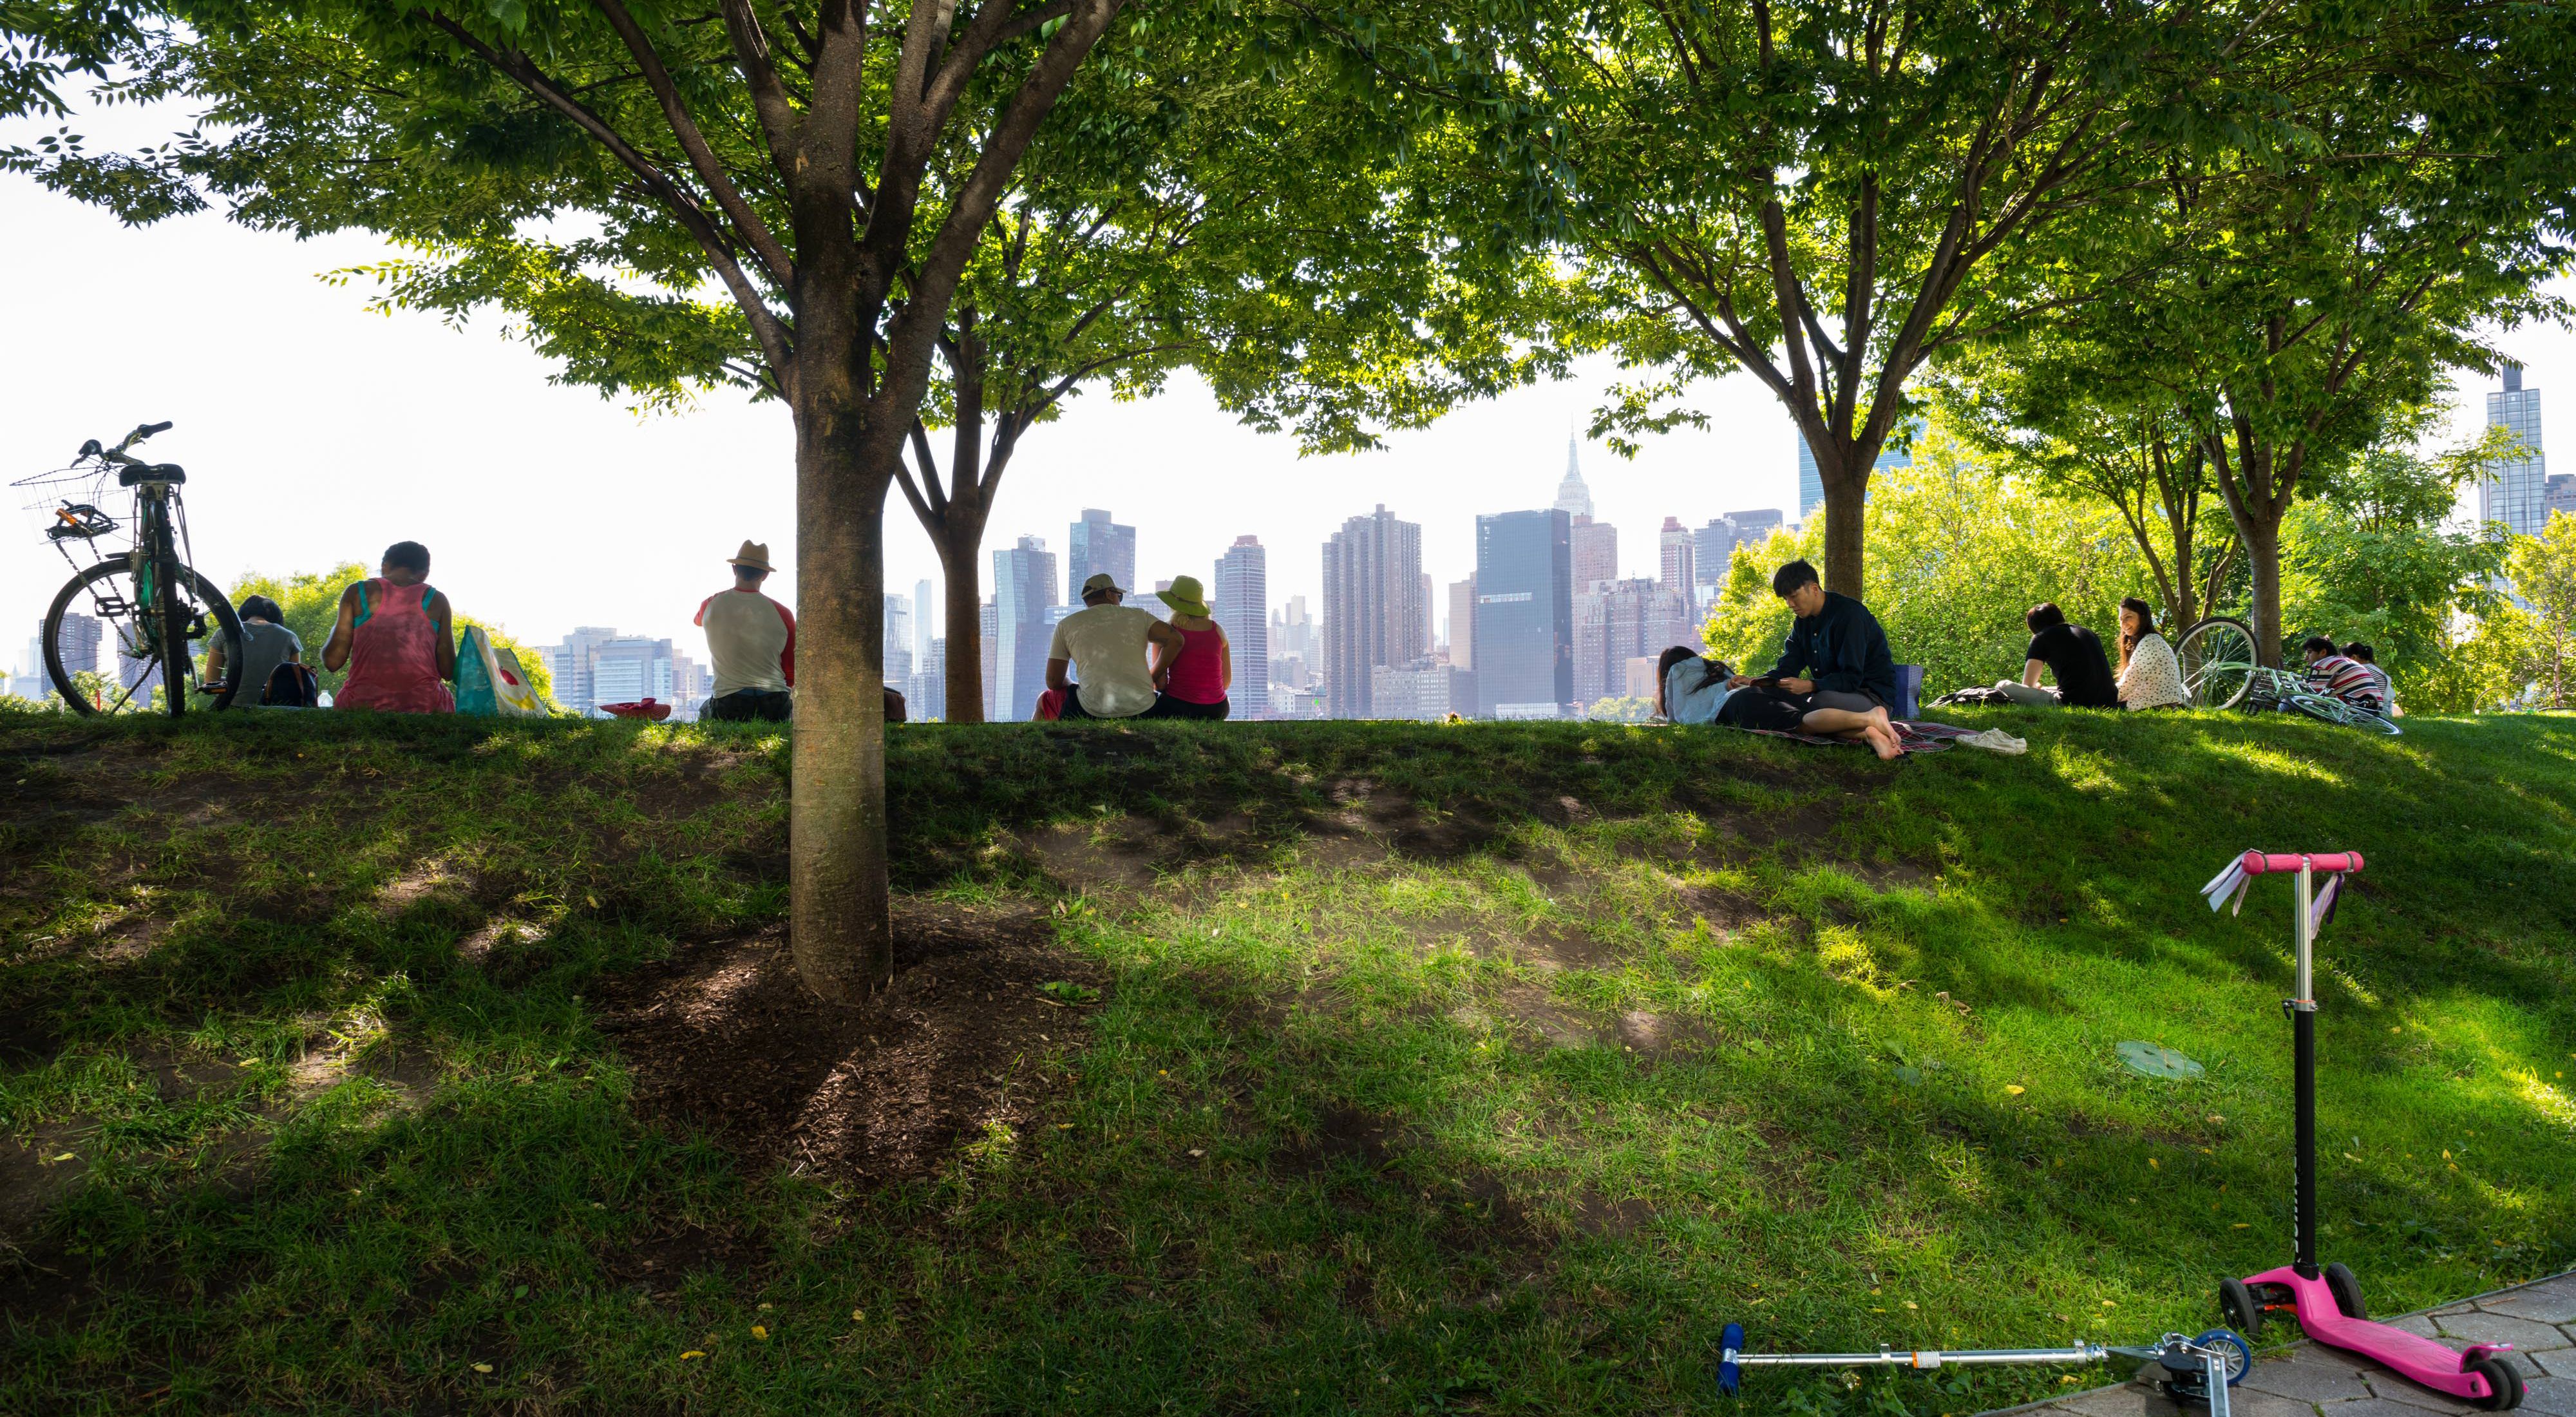 People sit under trees looking at the New York City skyline.